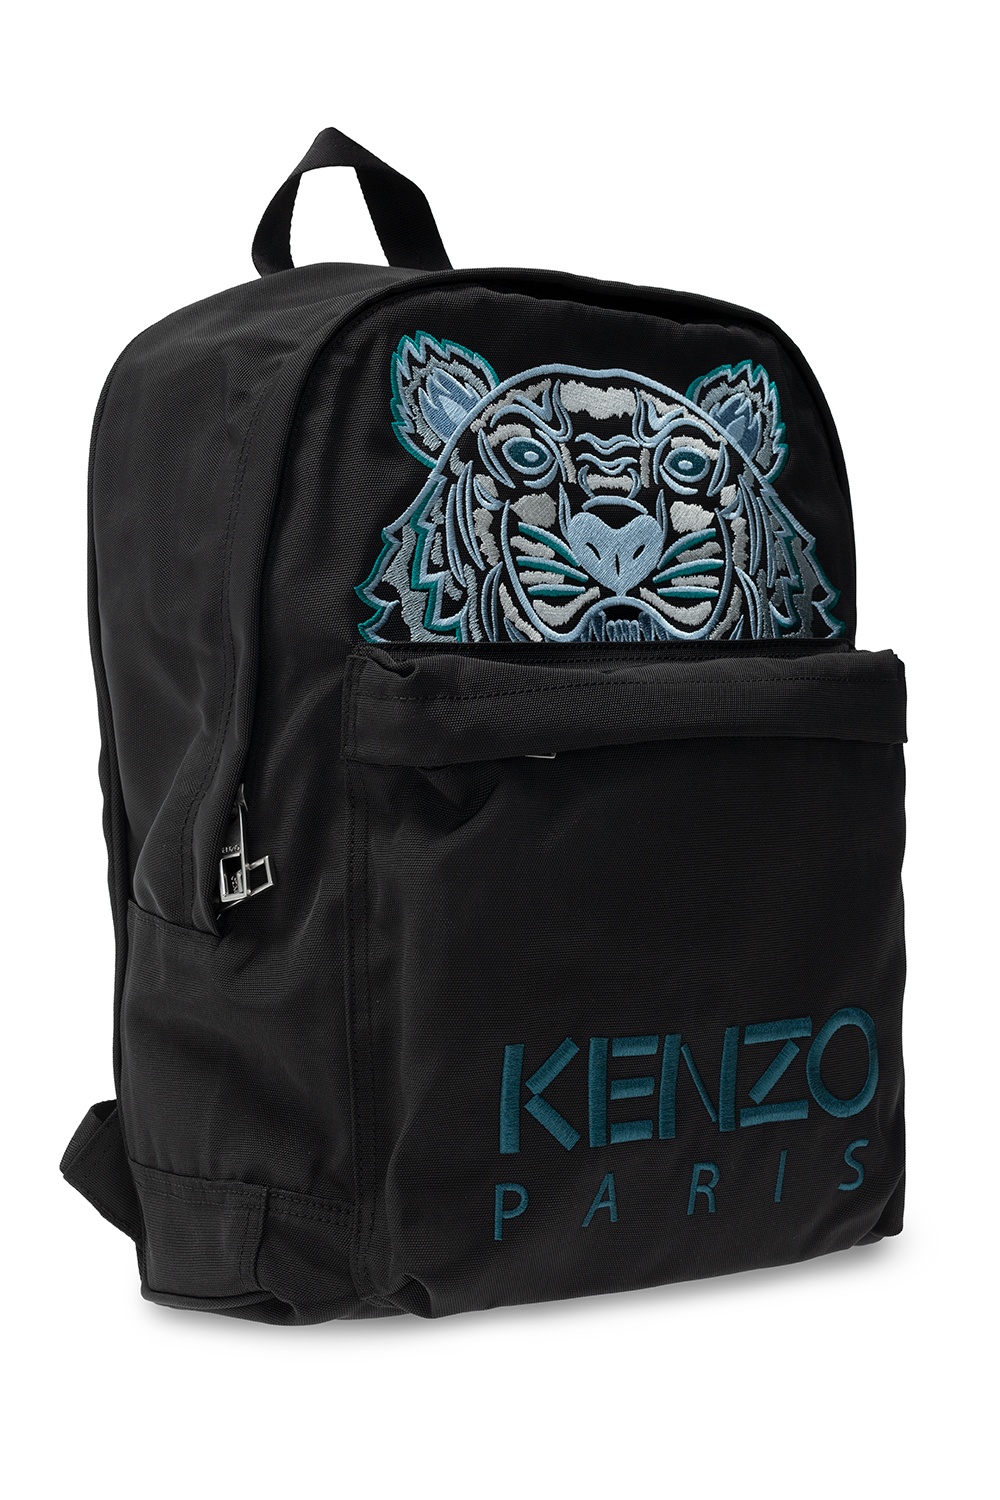 Kenzo ‘Tiger’ backpack with logo